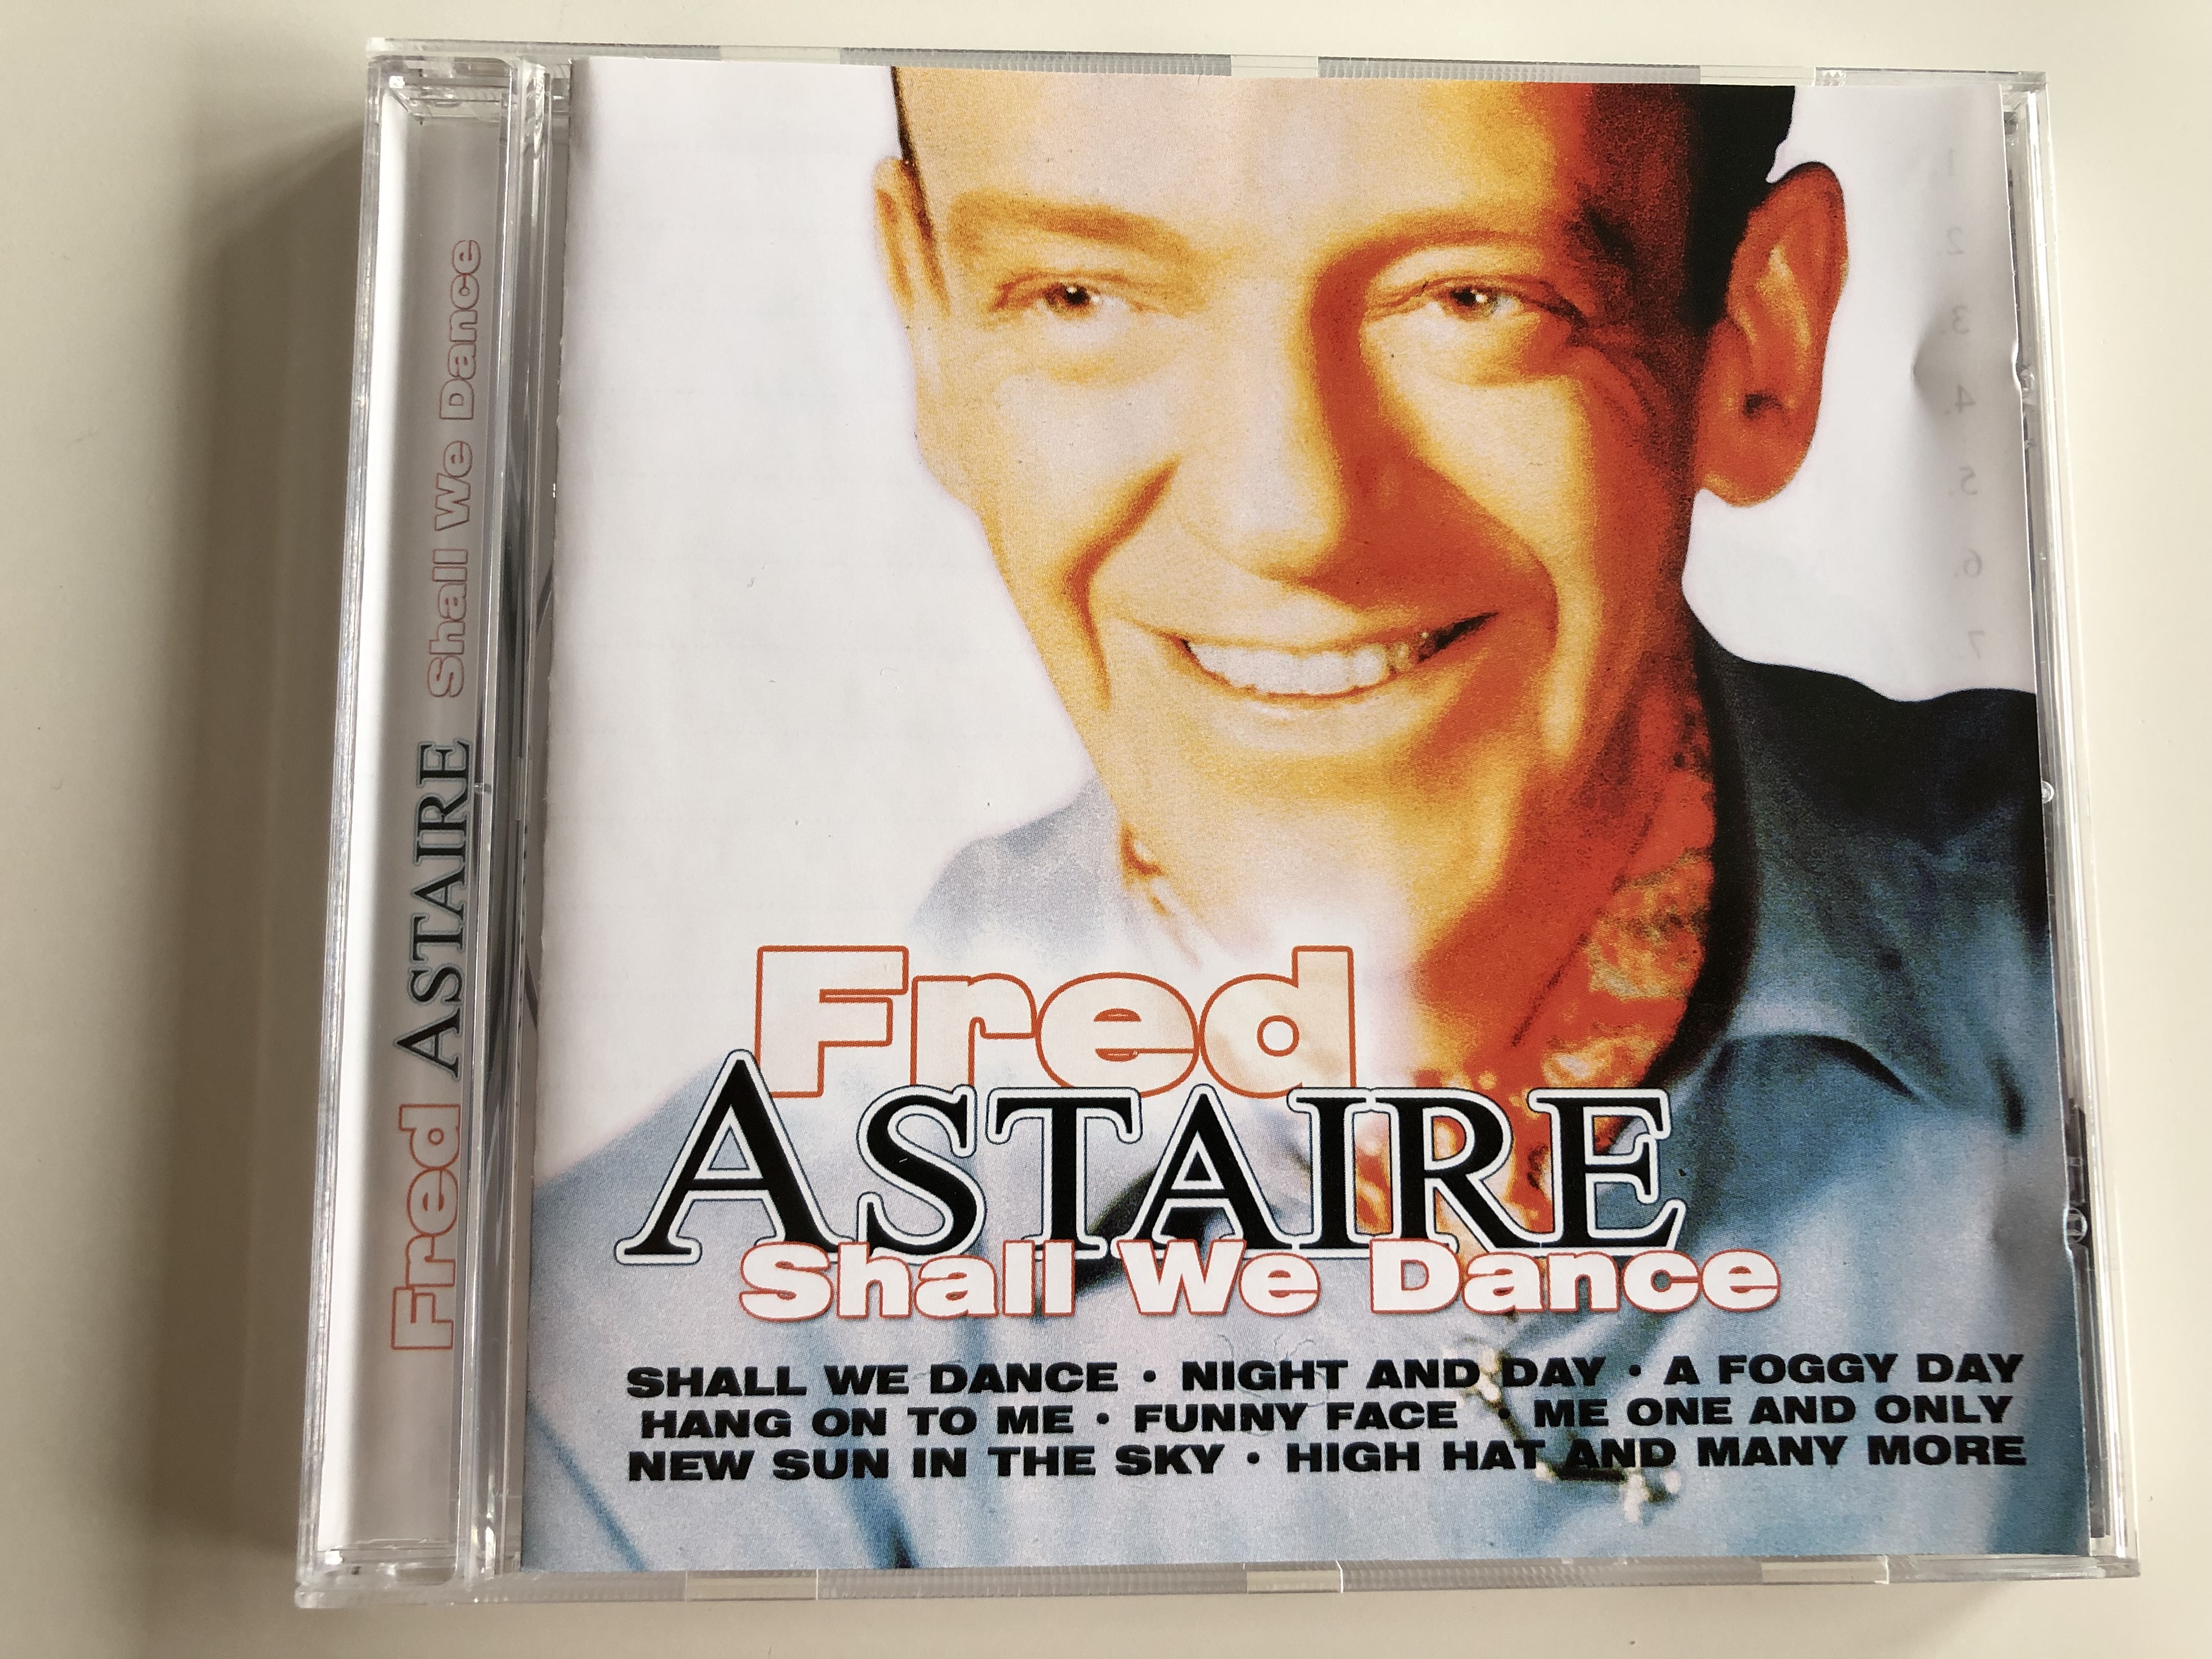 fred-astaire-shall-we-dance-night-and-day-a-foggy-day-hang-on-to-me-funny-face-new-sun-in-the-sky-audio-cd-2001-apwcd1180-1-.jpg